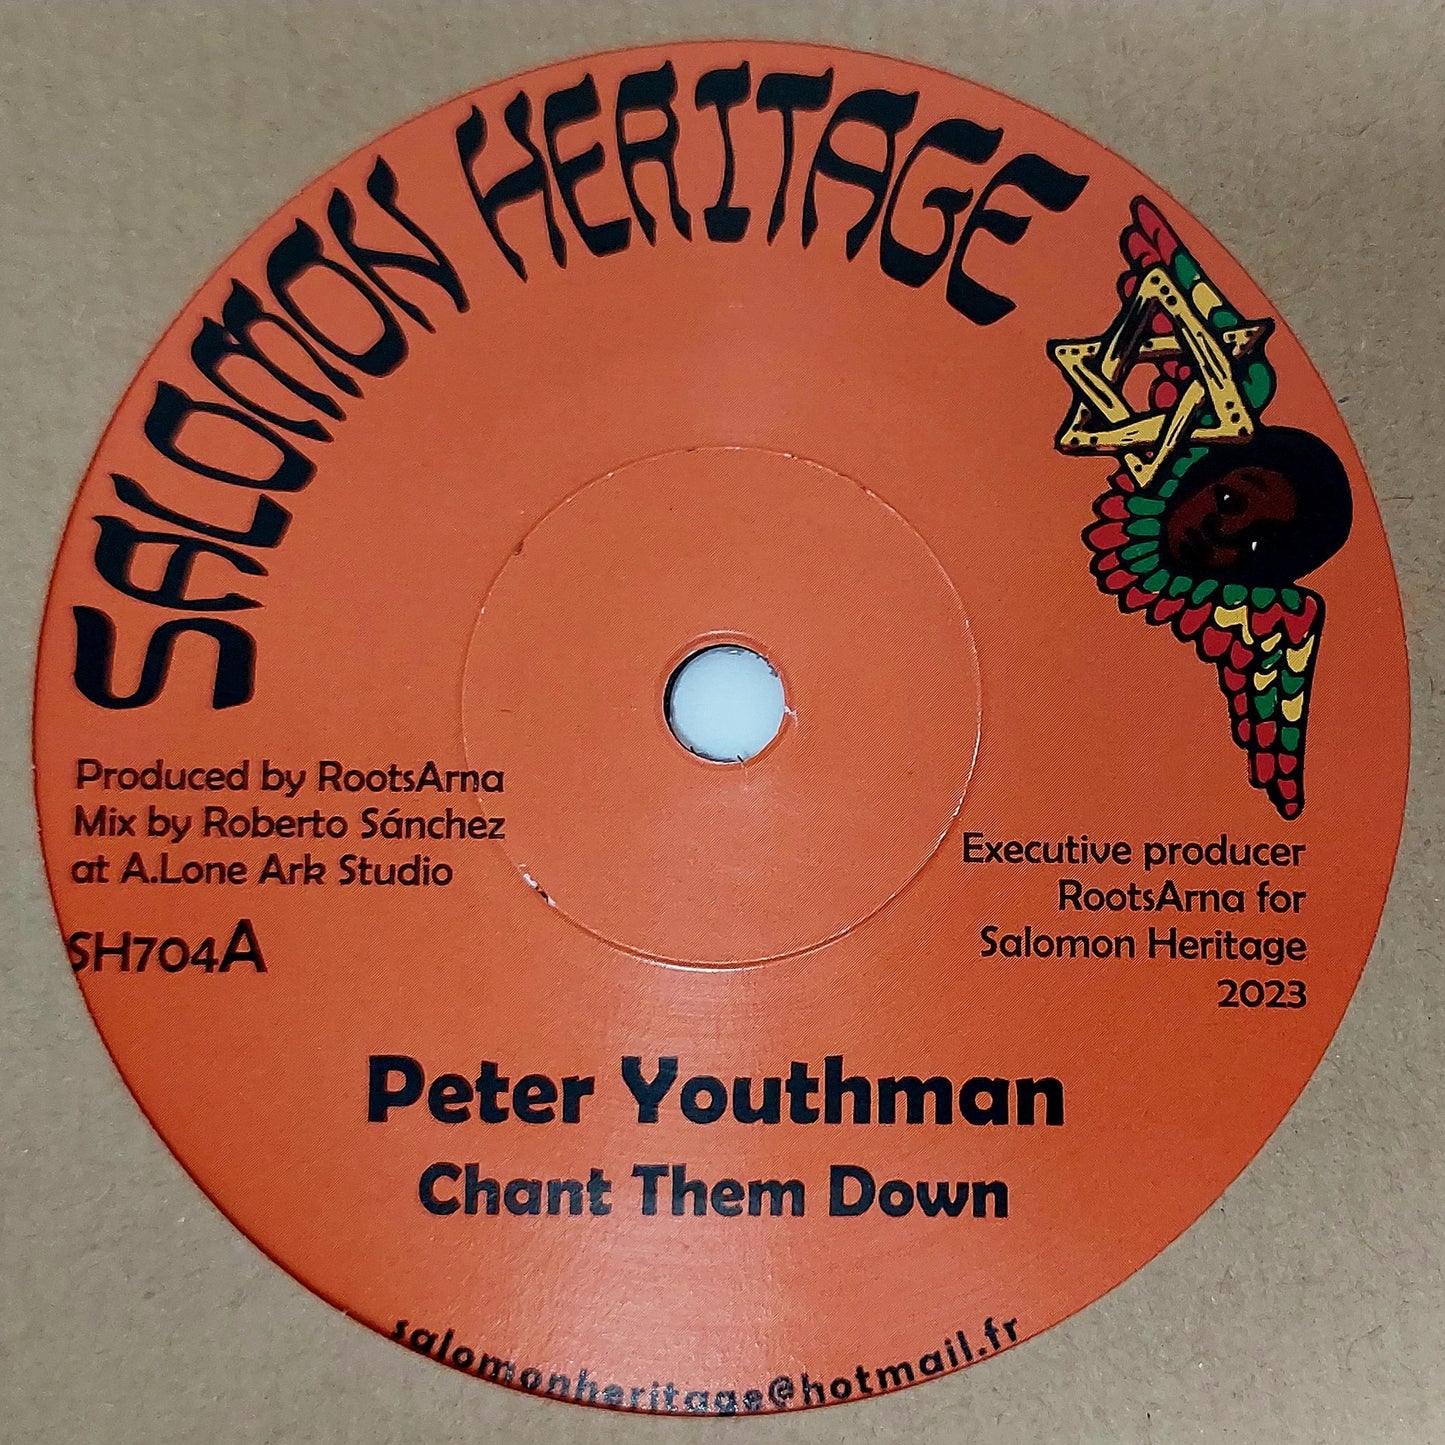 Peter Youthman - Chant Them Down